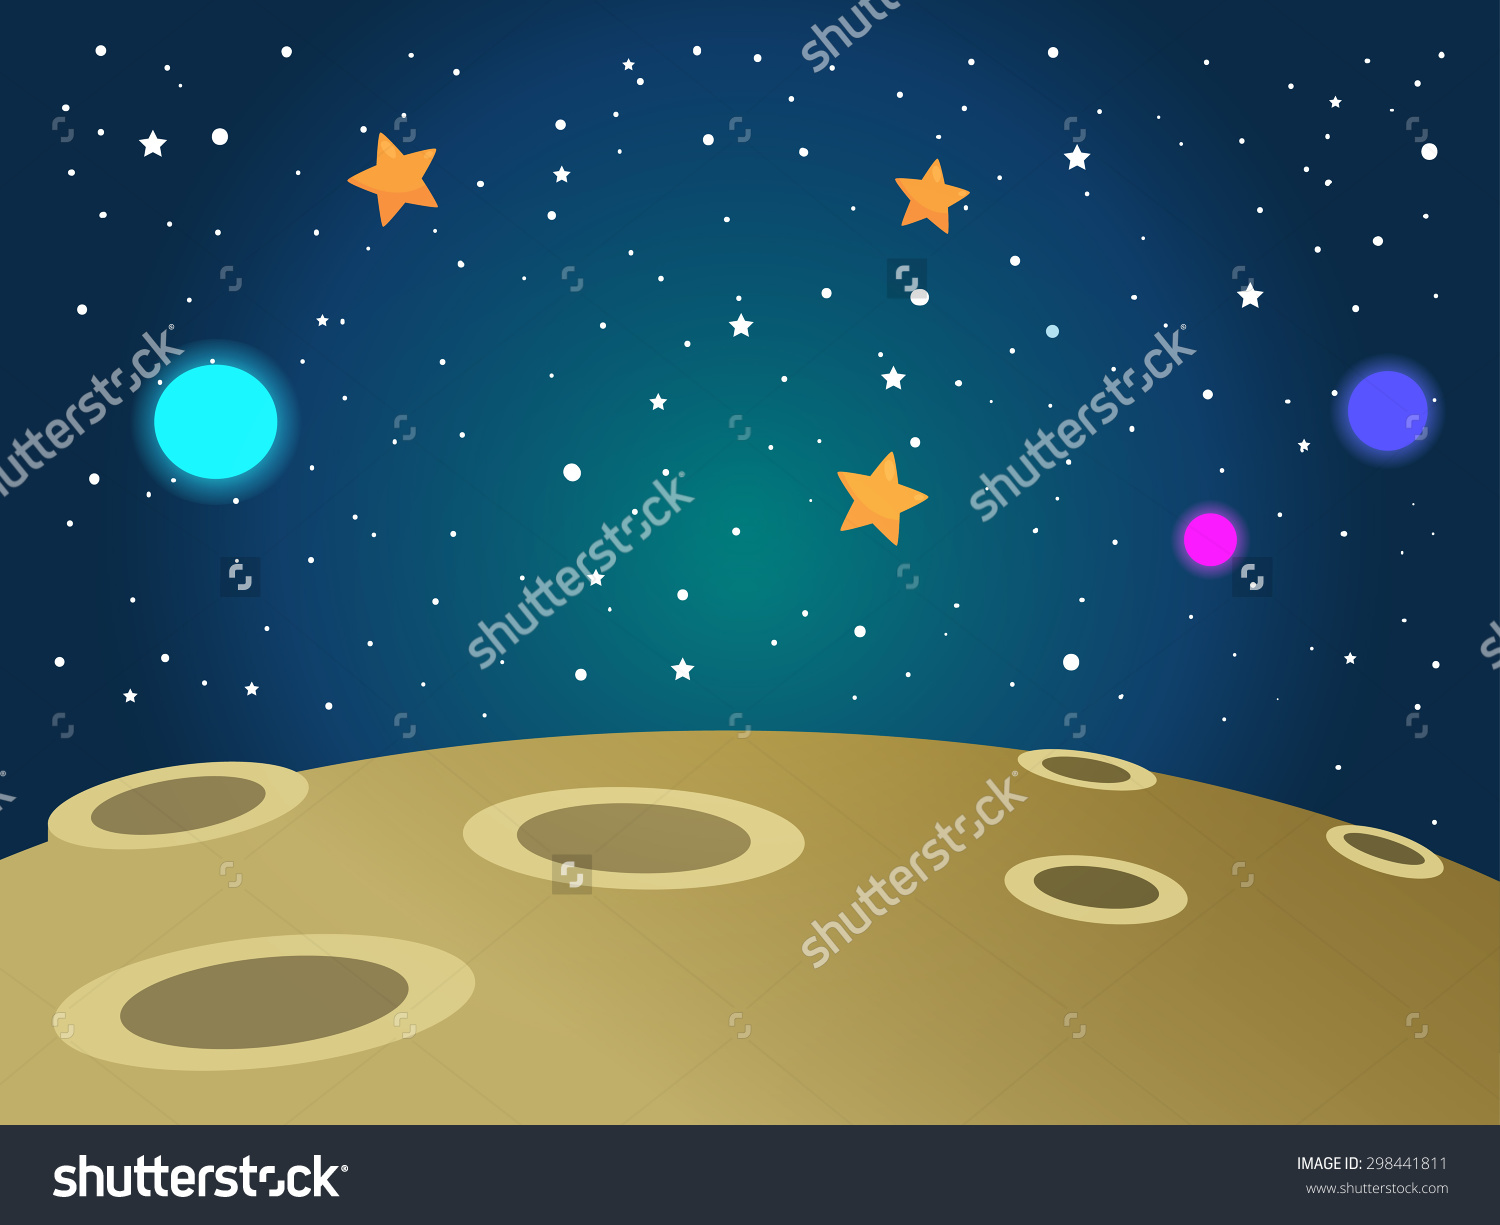 Background clipart outer.